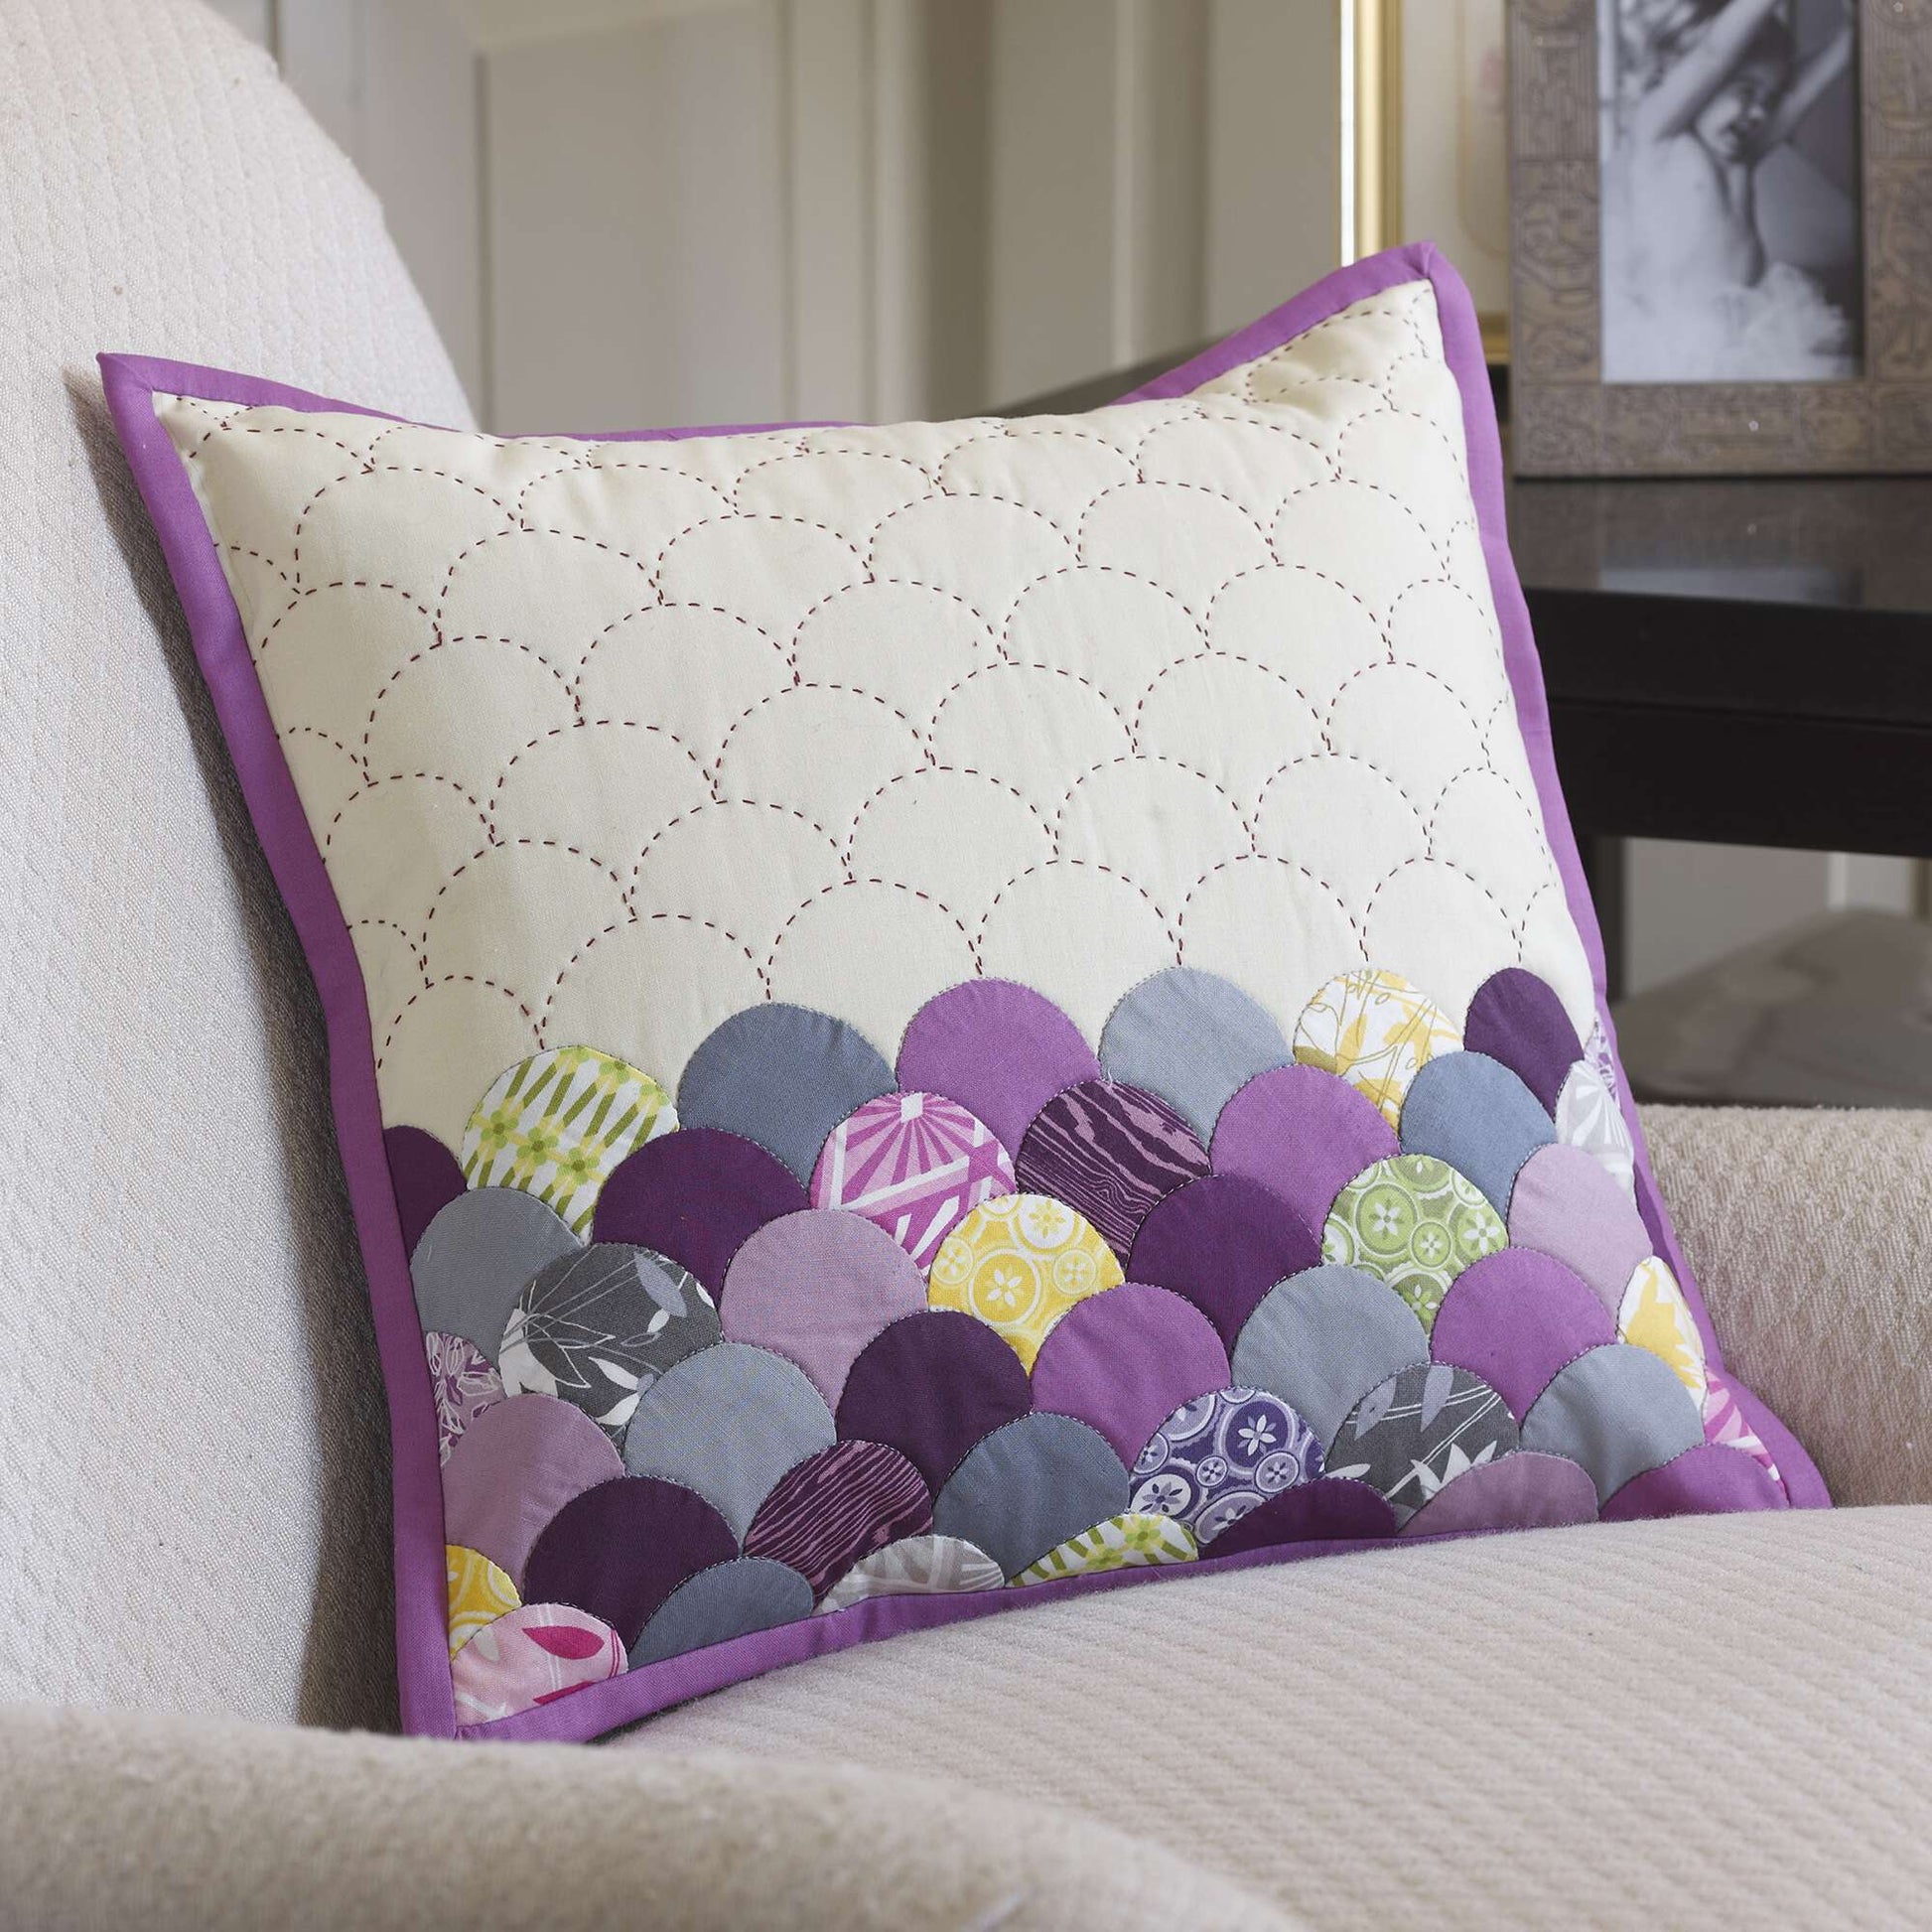 Free Coats & Clark Quilting Clamshell Pillow Pattern